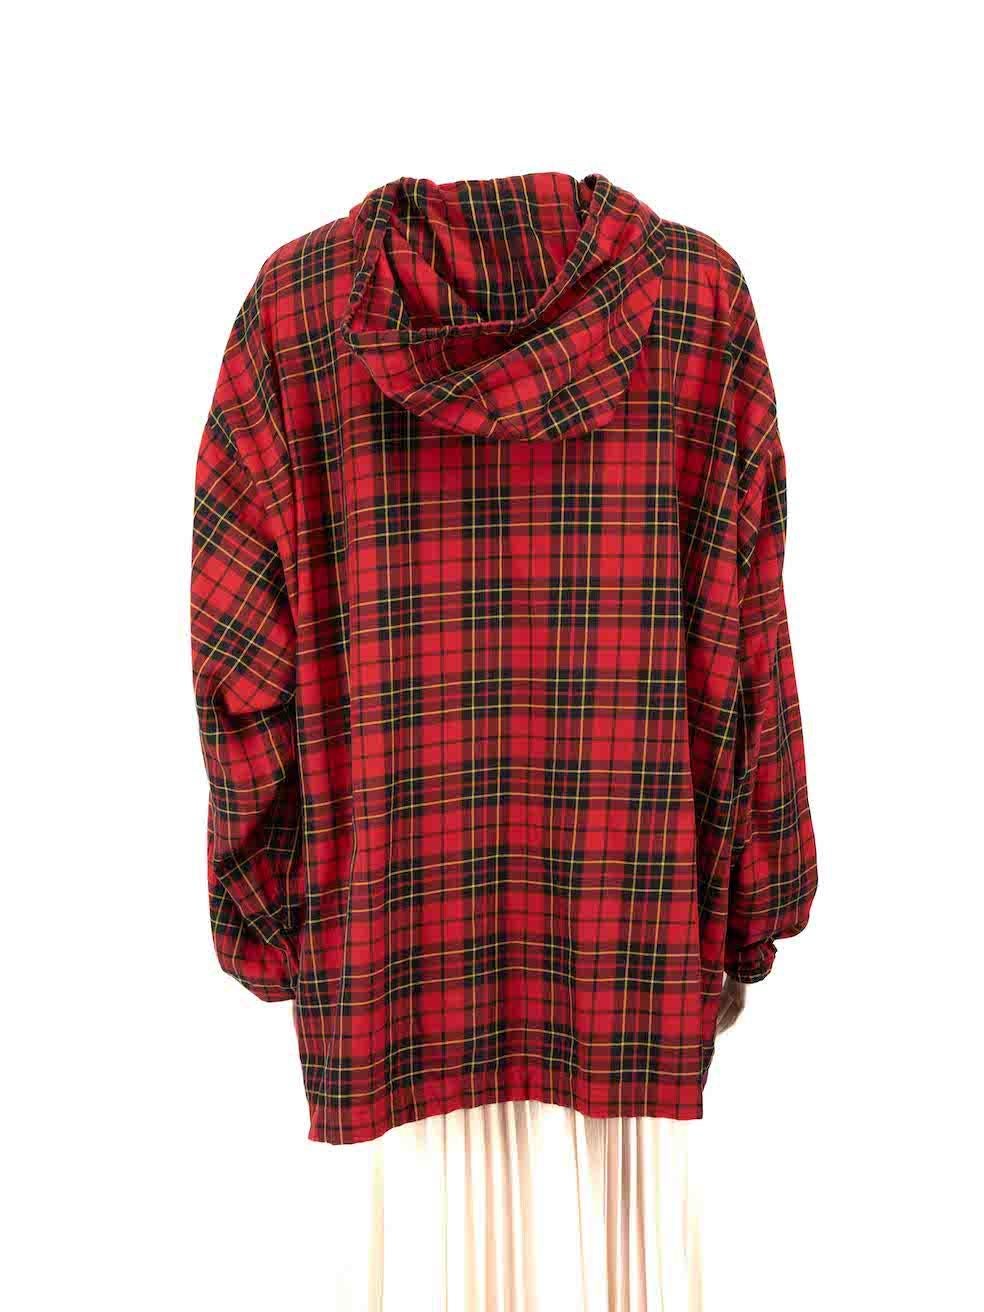 Balenciaga Red Tartan Flannel Hooded Zip Jacket Size M In Good Condition For Sale In London, GB